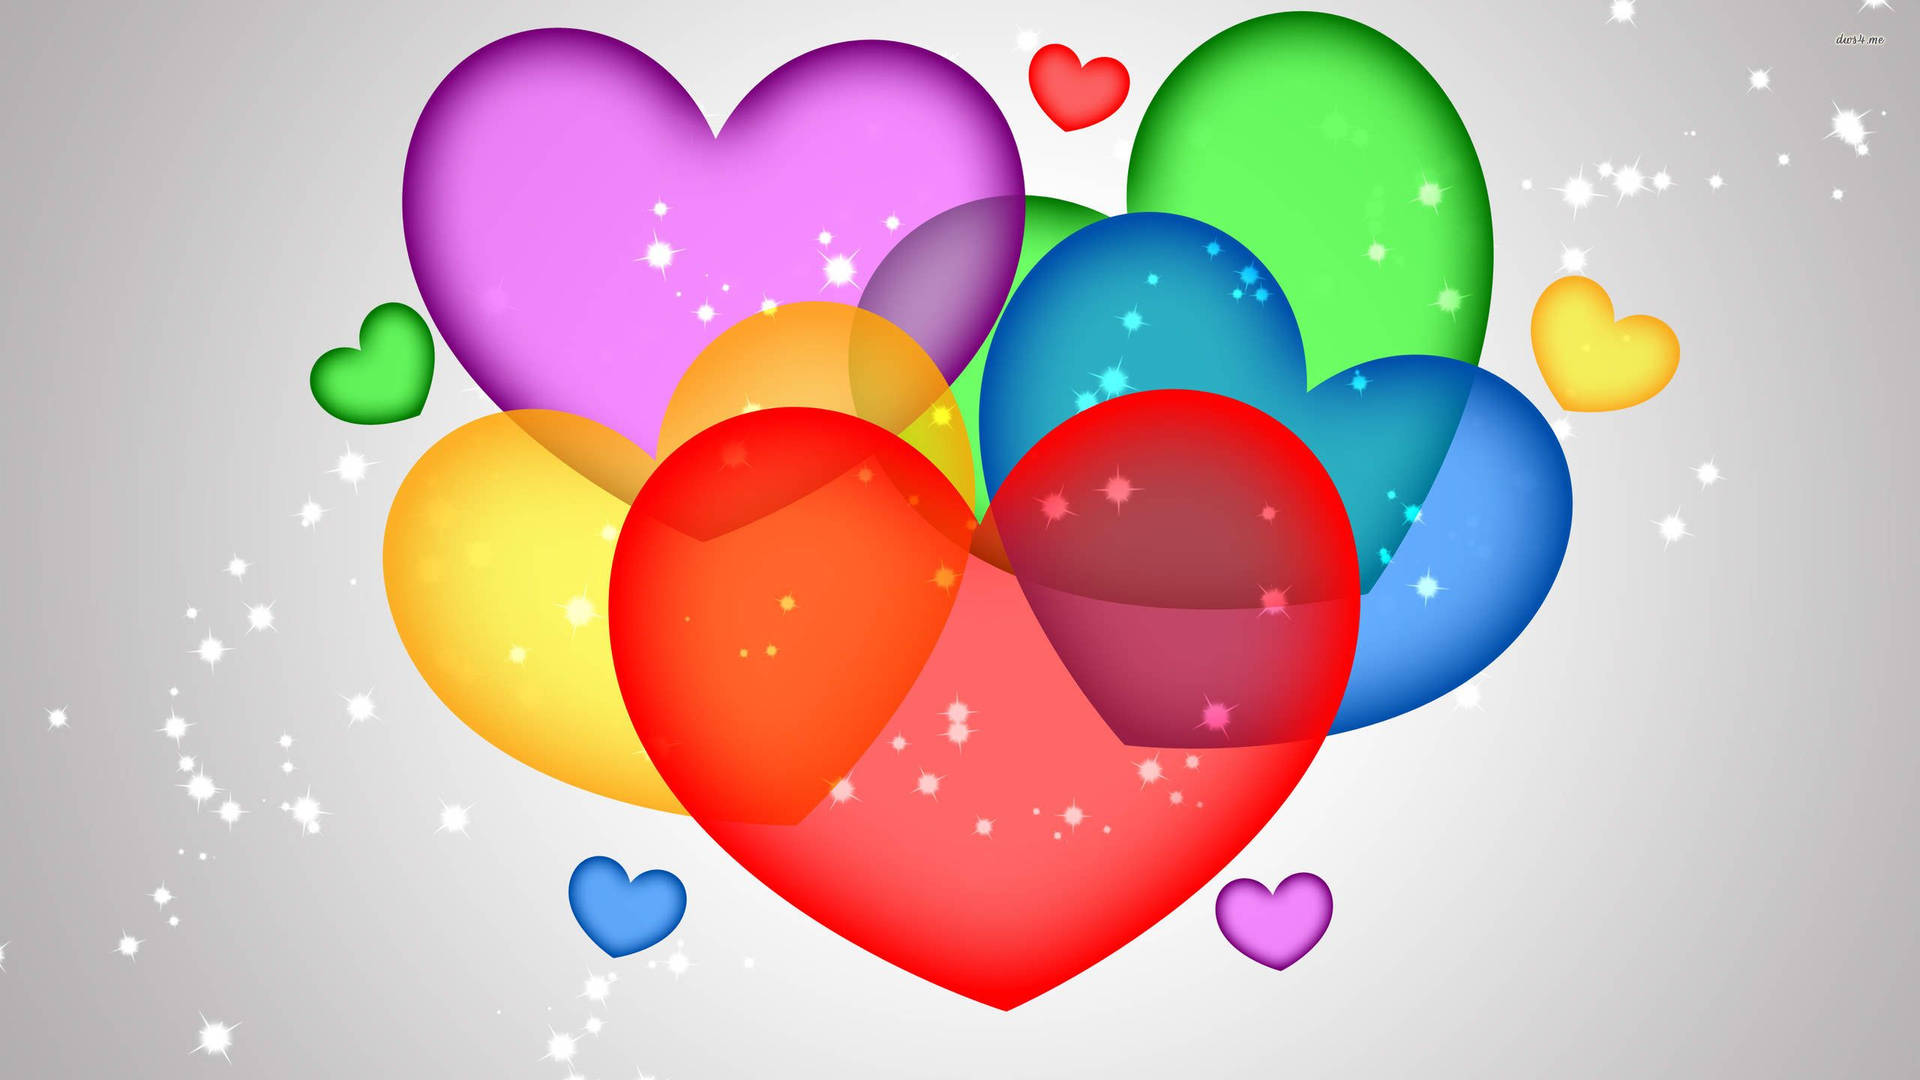 Colorful Hearts Filled With Love Wallpaper